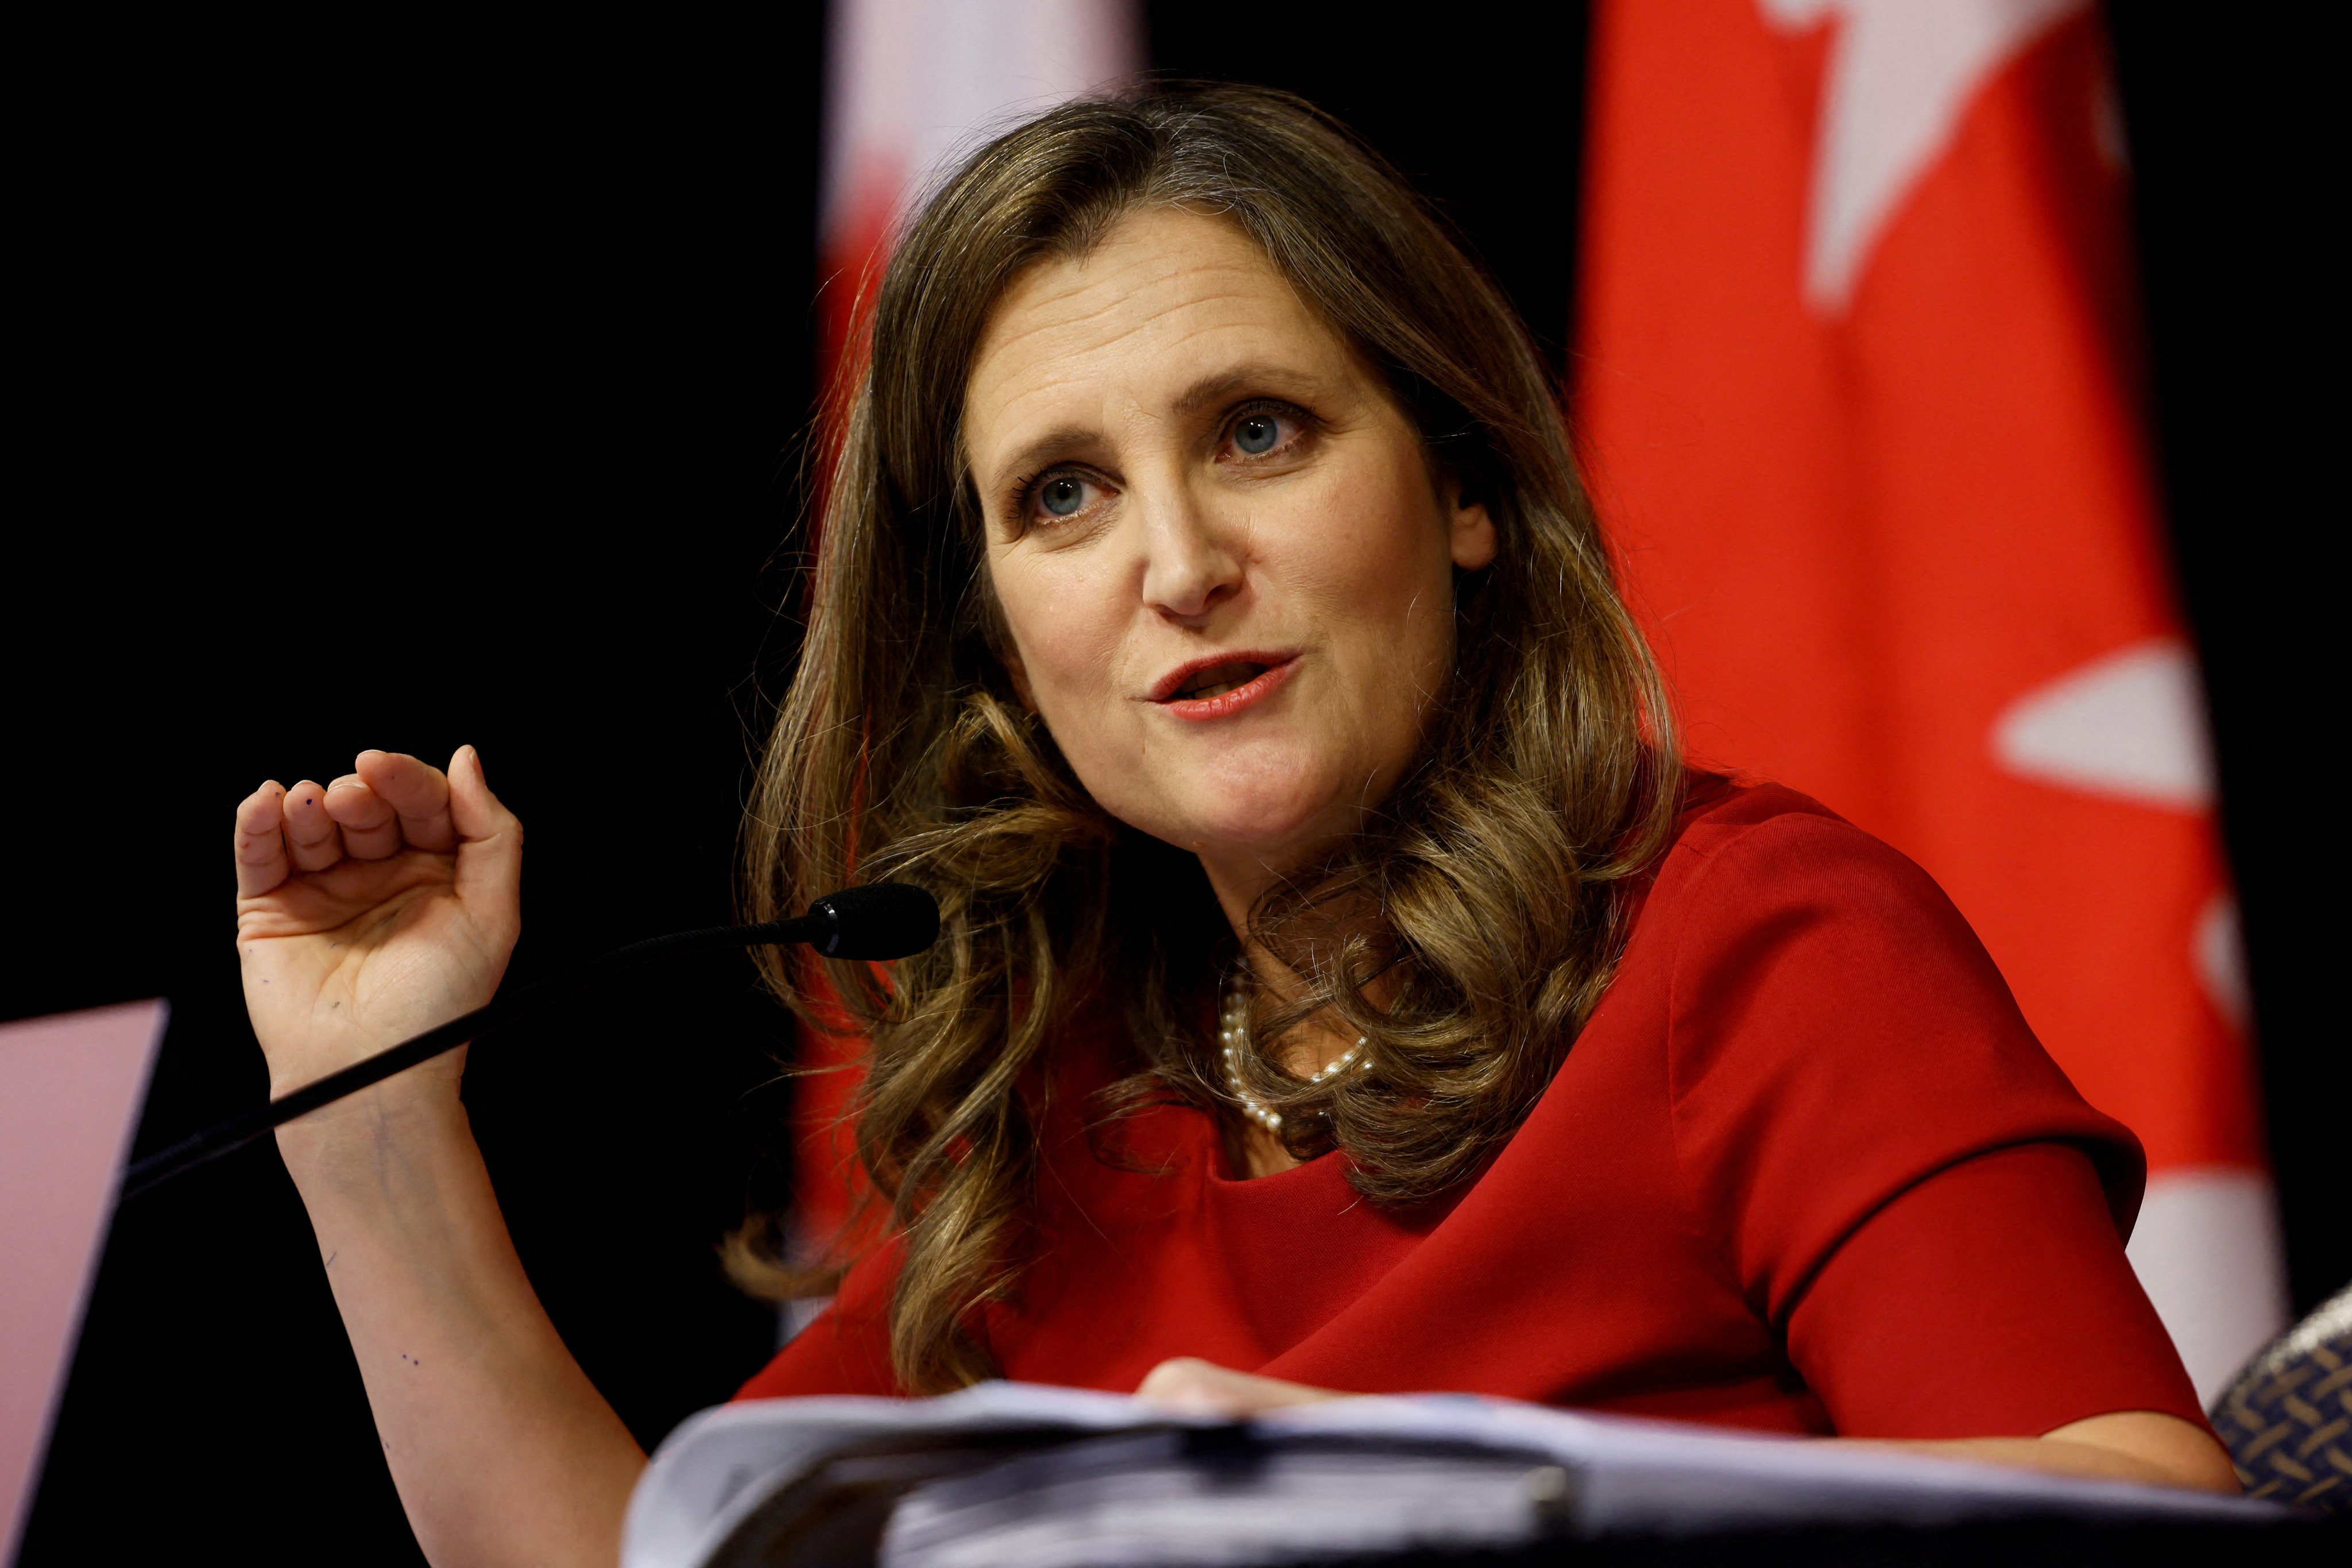 Canada’s Deputy Prime Minister Chrystia Freeland takes part in a press conference in Ottawa in November. Photo: Reuters